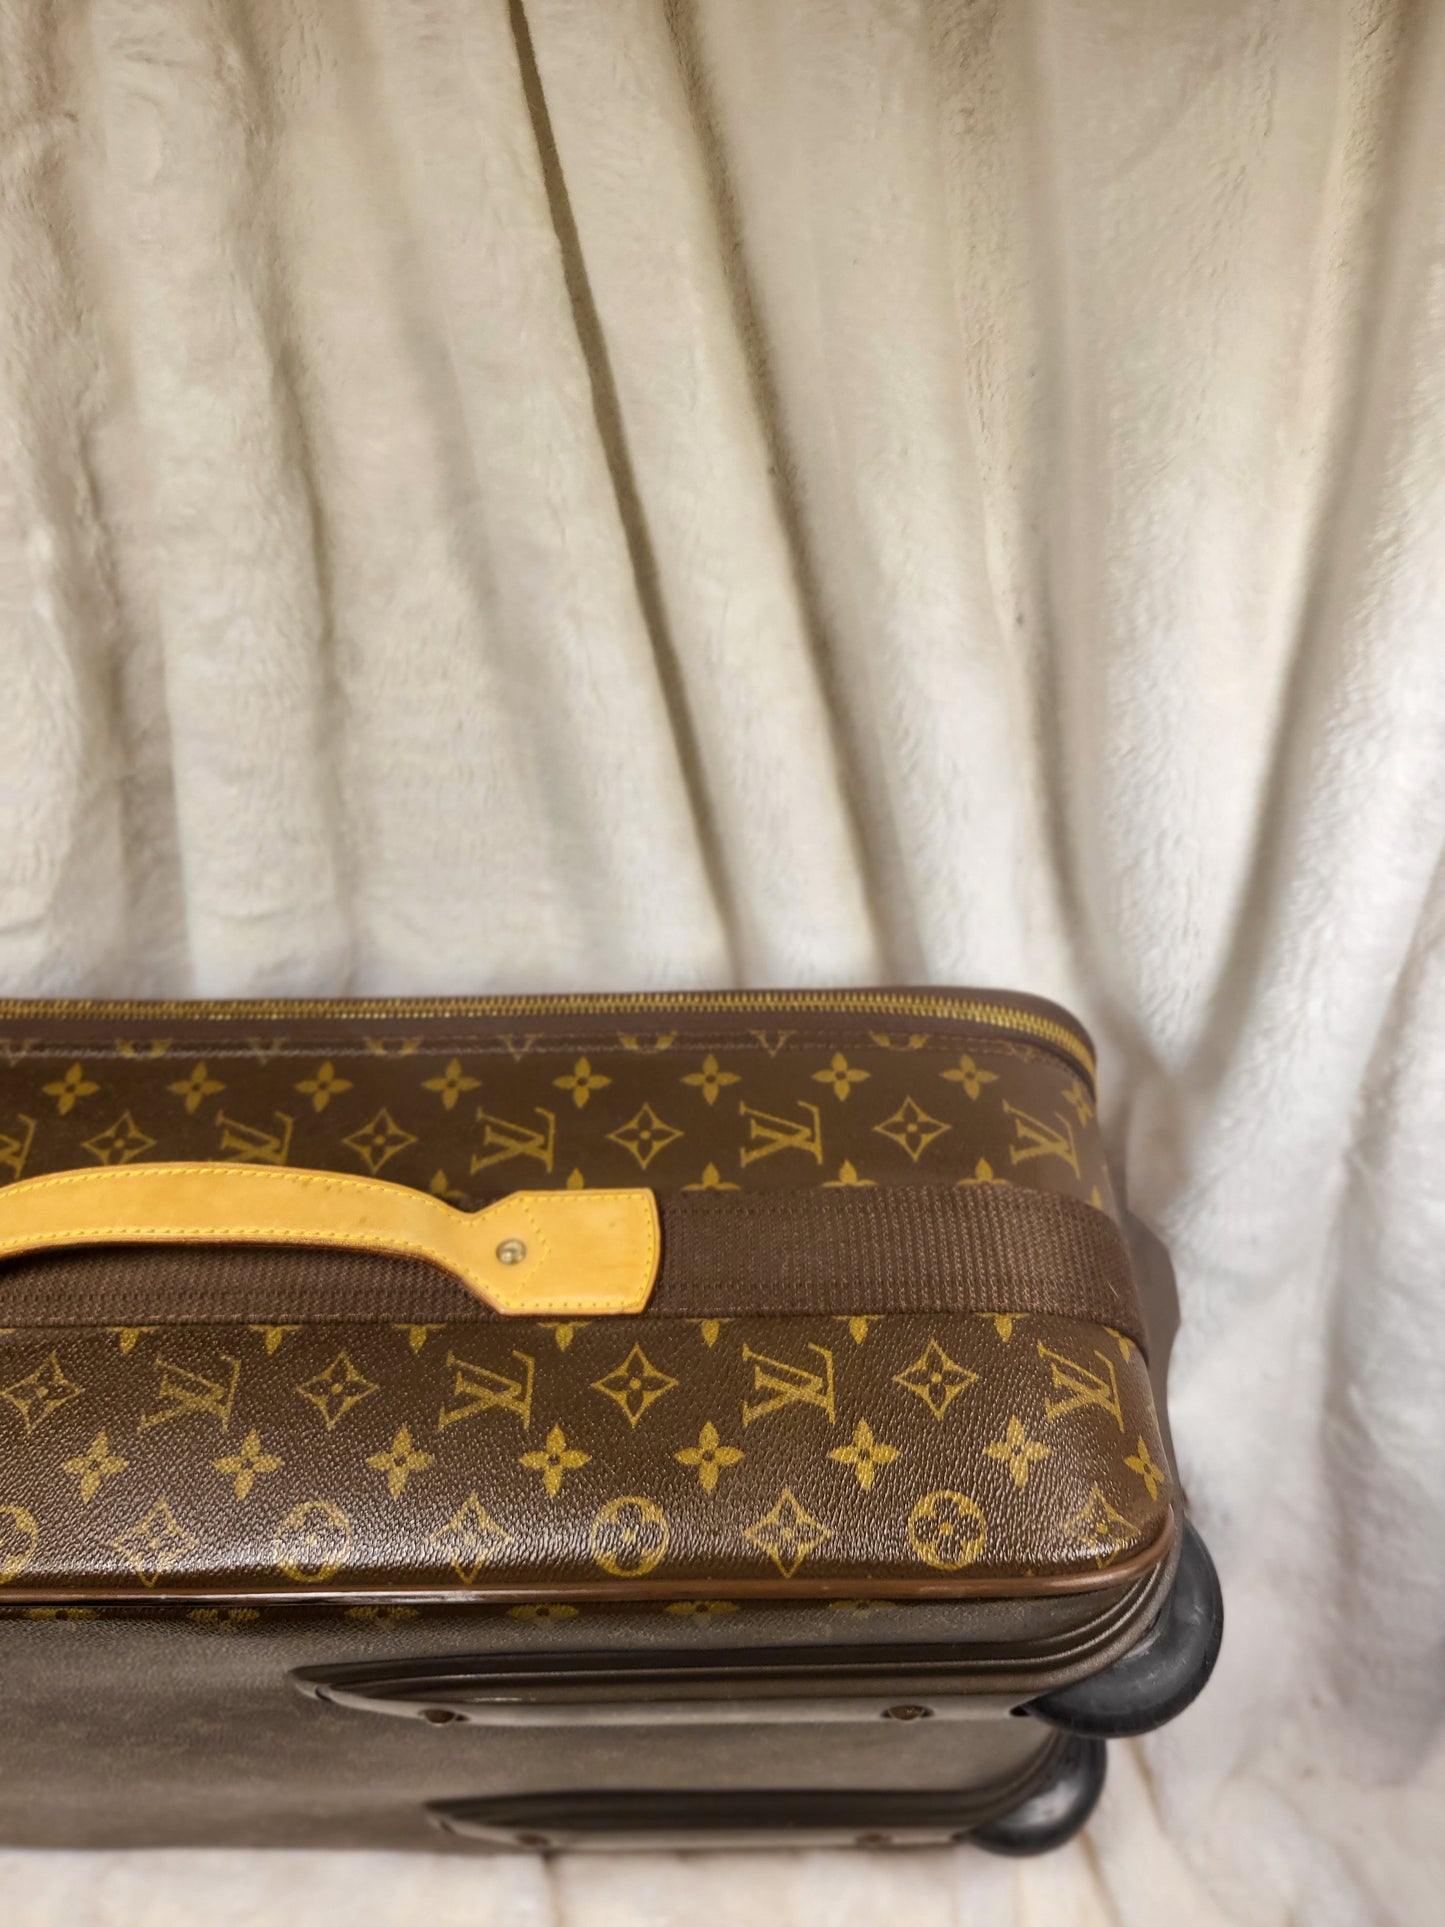 Authentic pre-owned Louis Vuitton Pegase 55 suitcase carry on